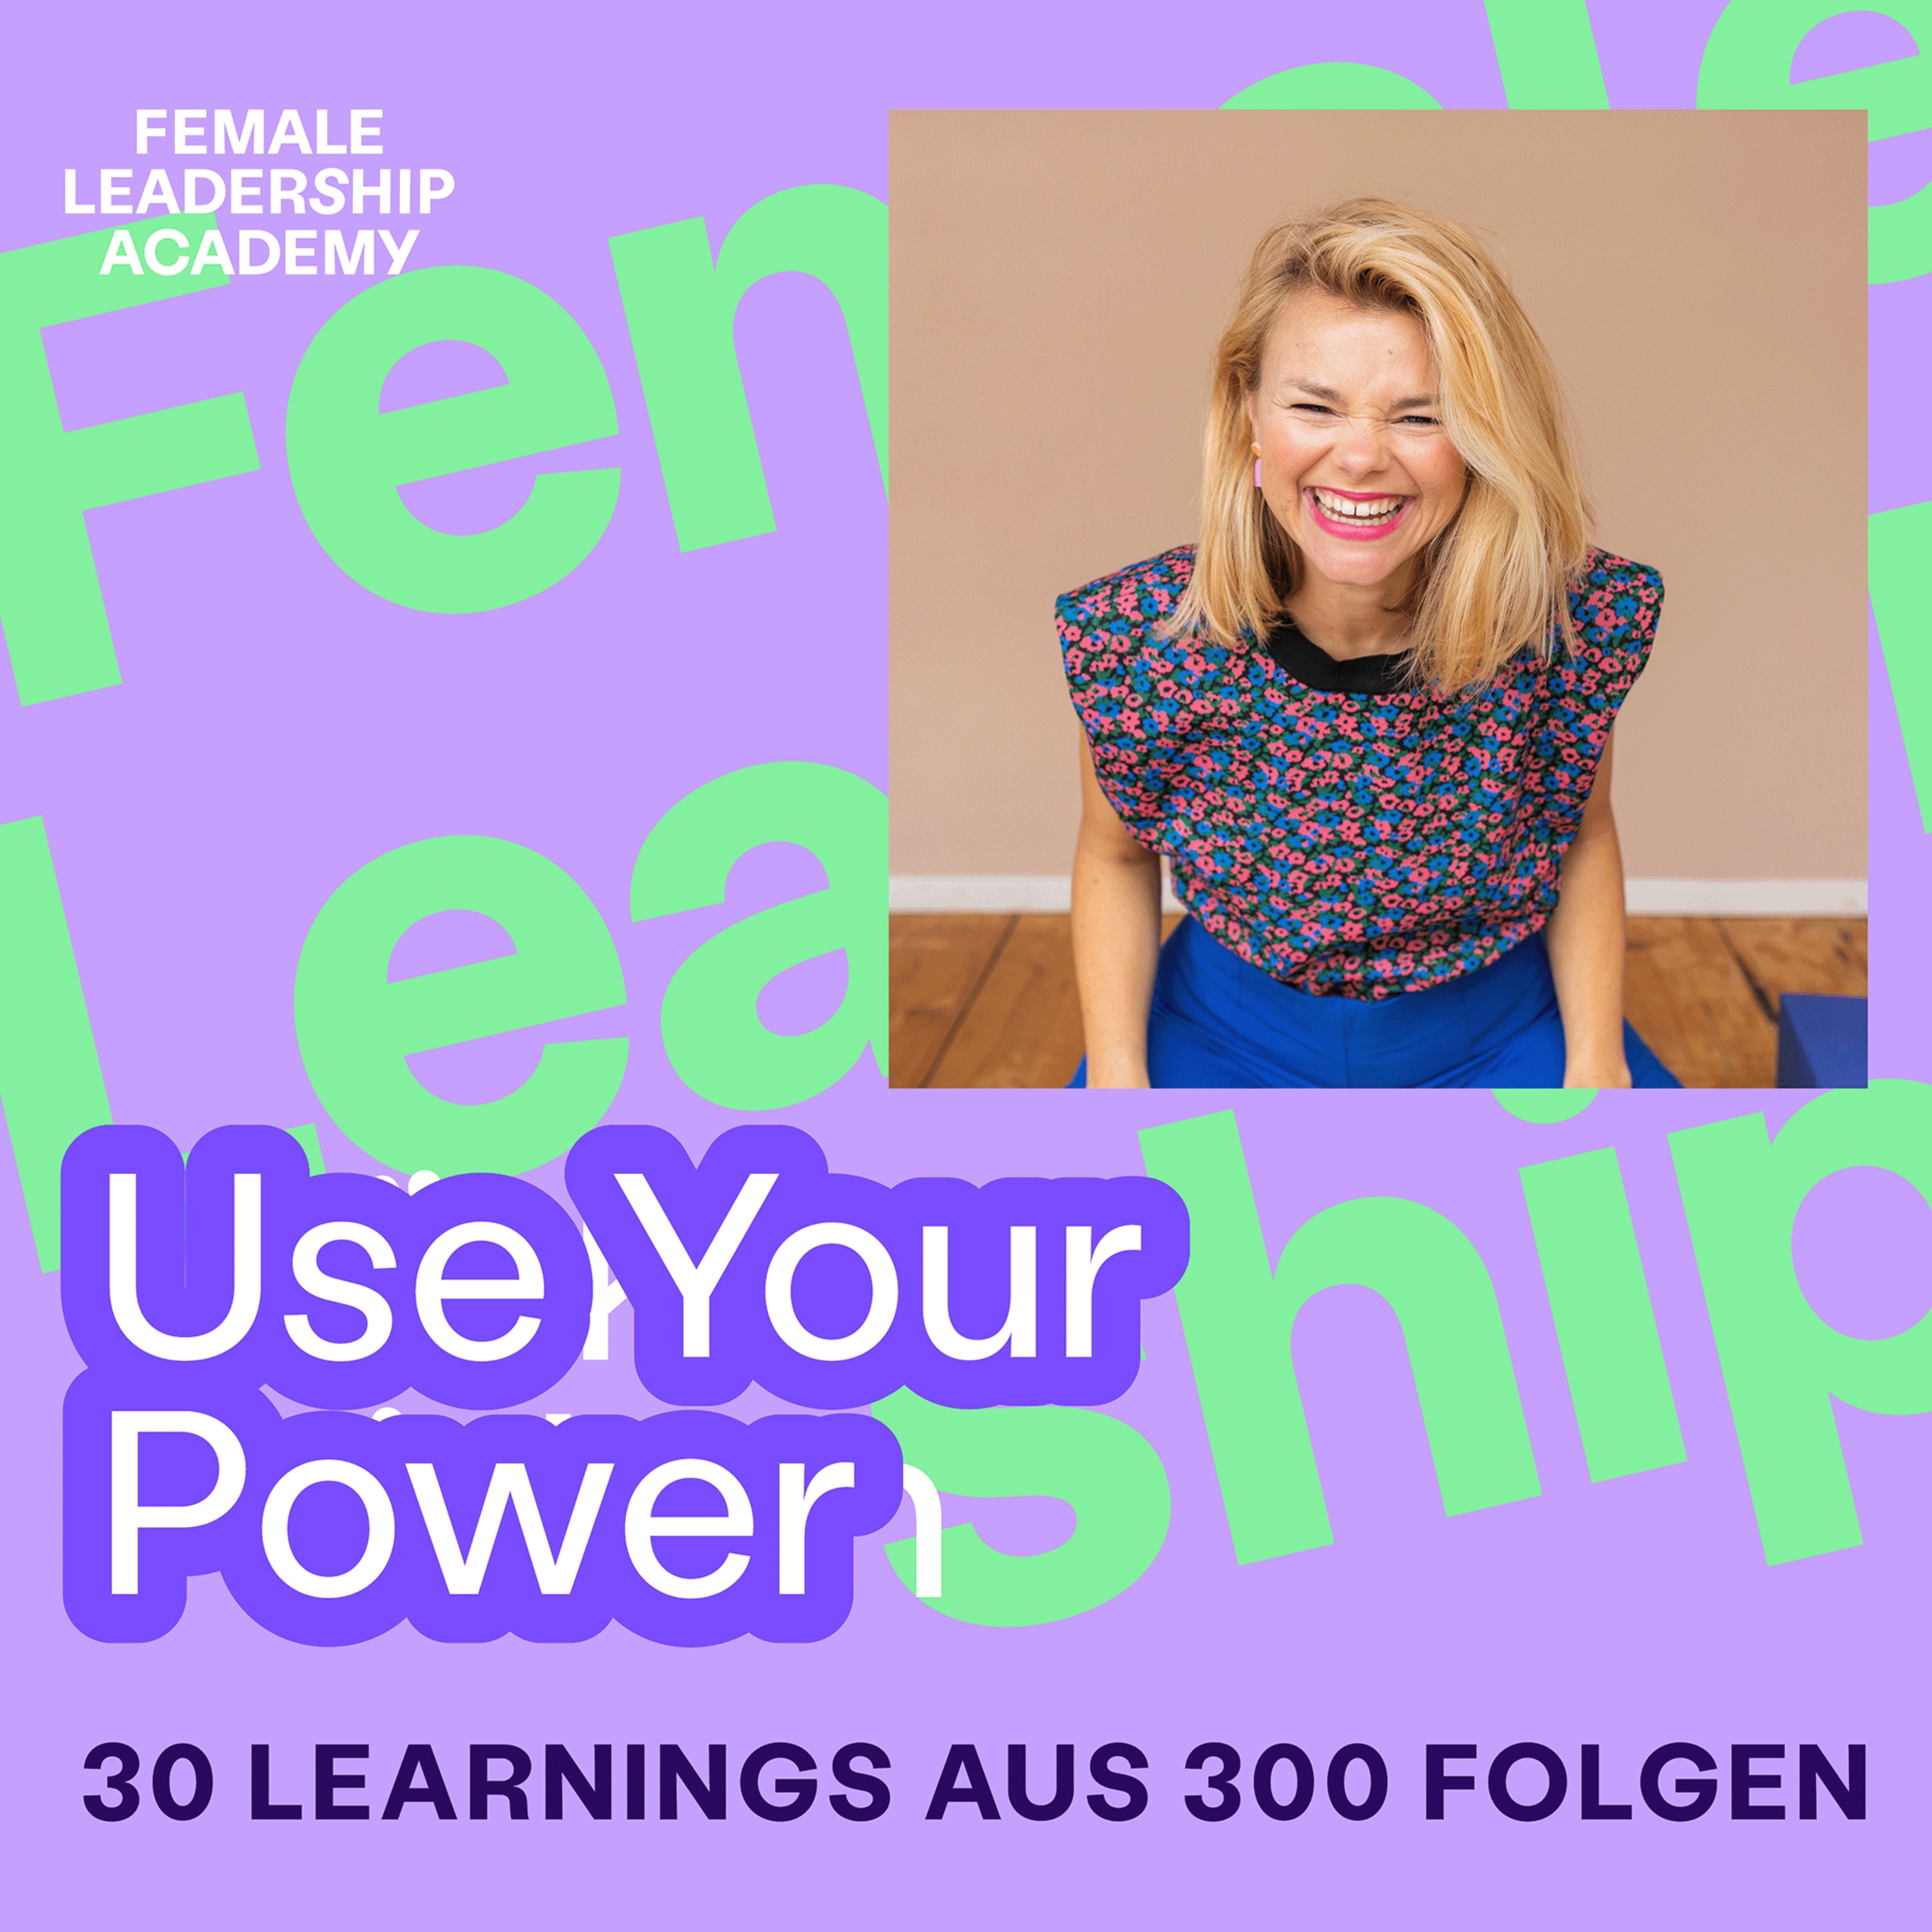 #300 Use Your Power: 30 Learnings aus 300 Folgen